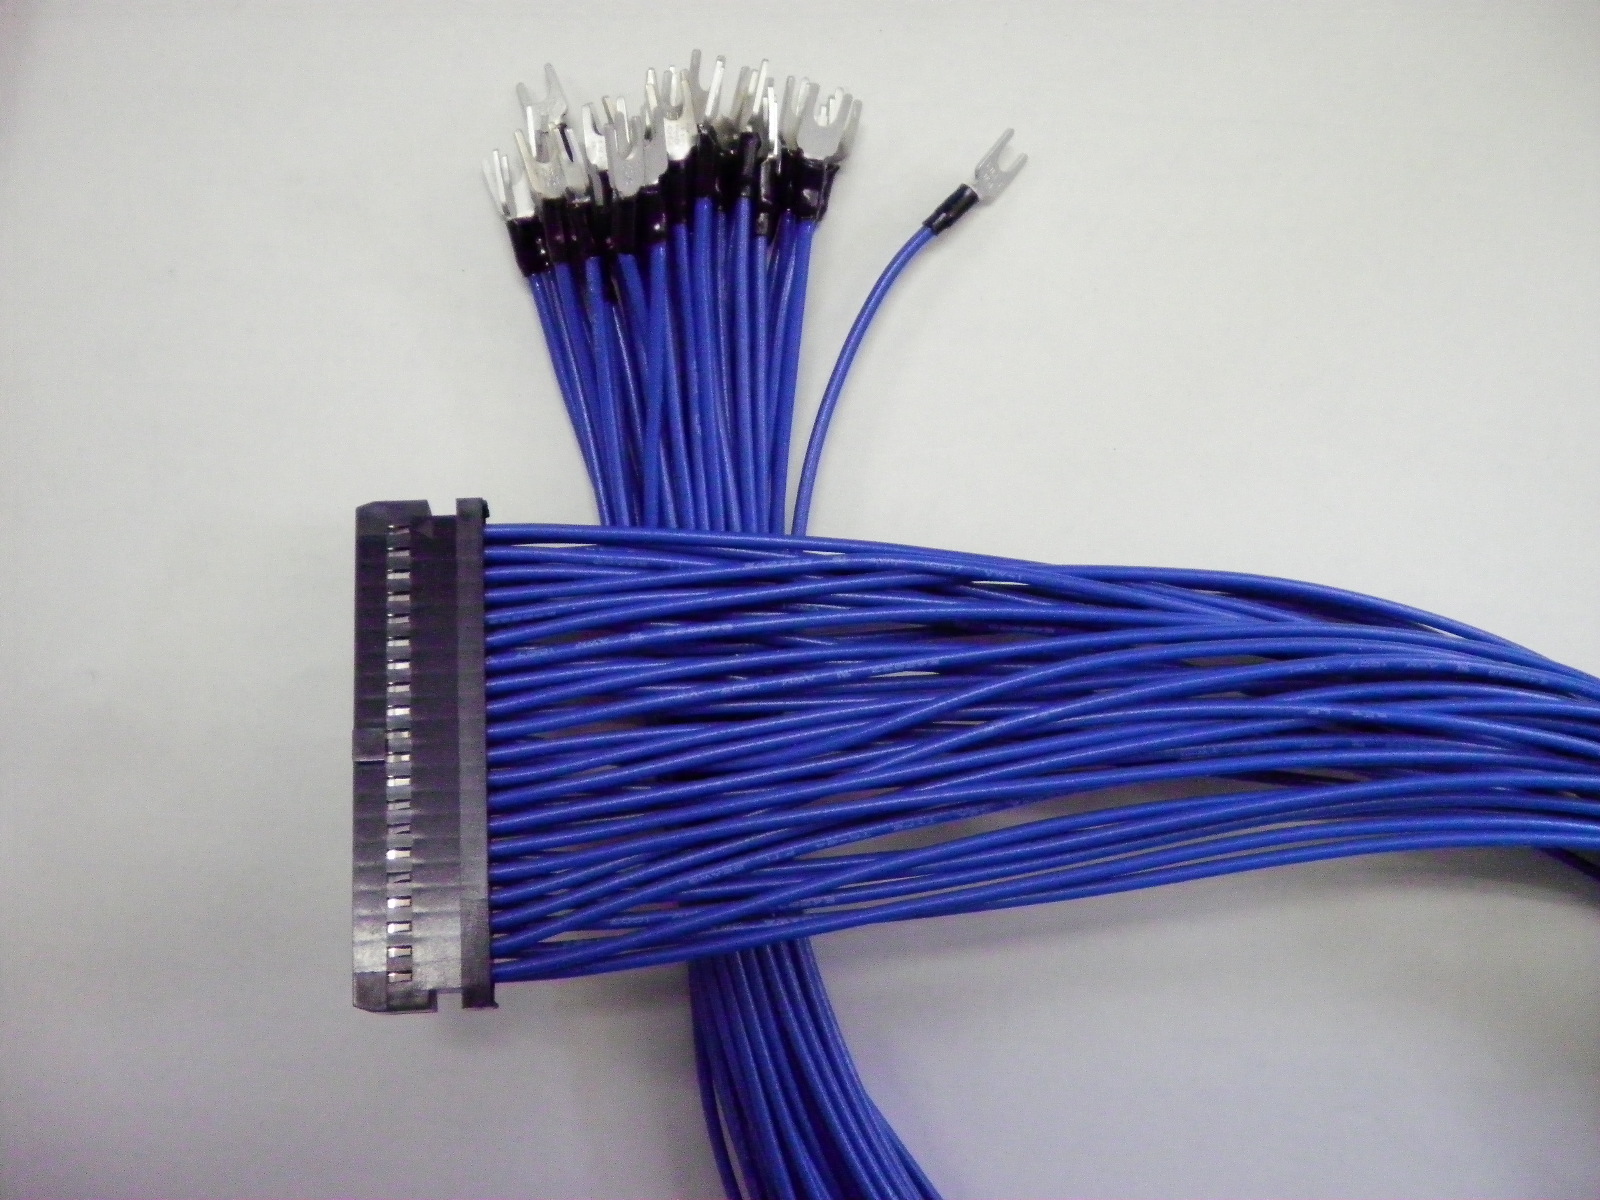 http://www.cable-harness-ex.com/case/SANY0004.JPG